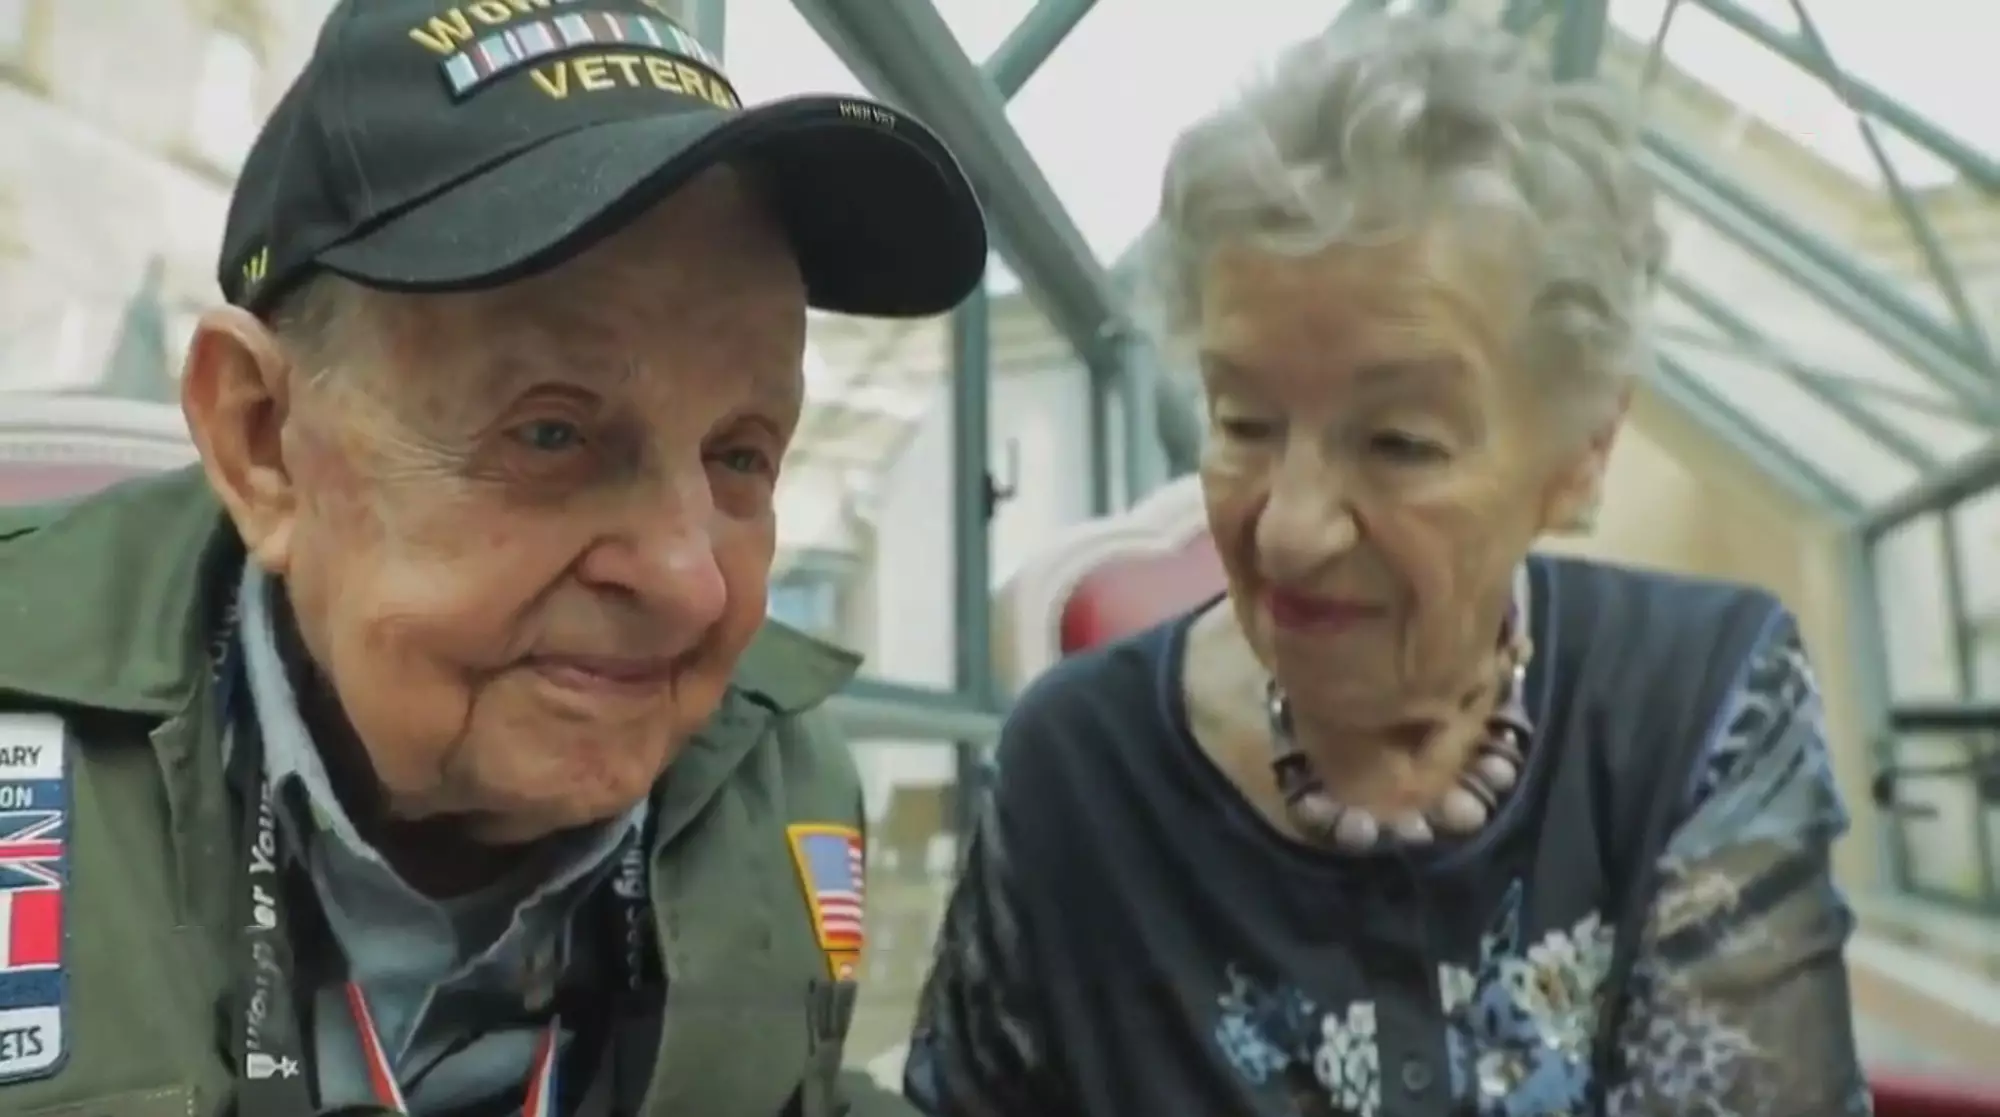 The pair were reunited after 75 years apart.